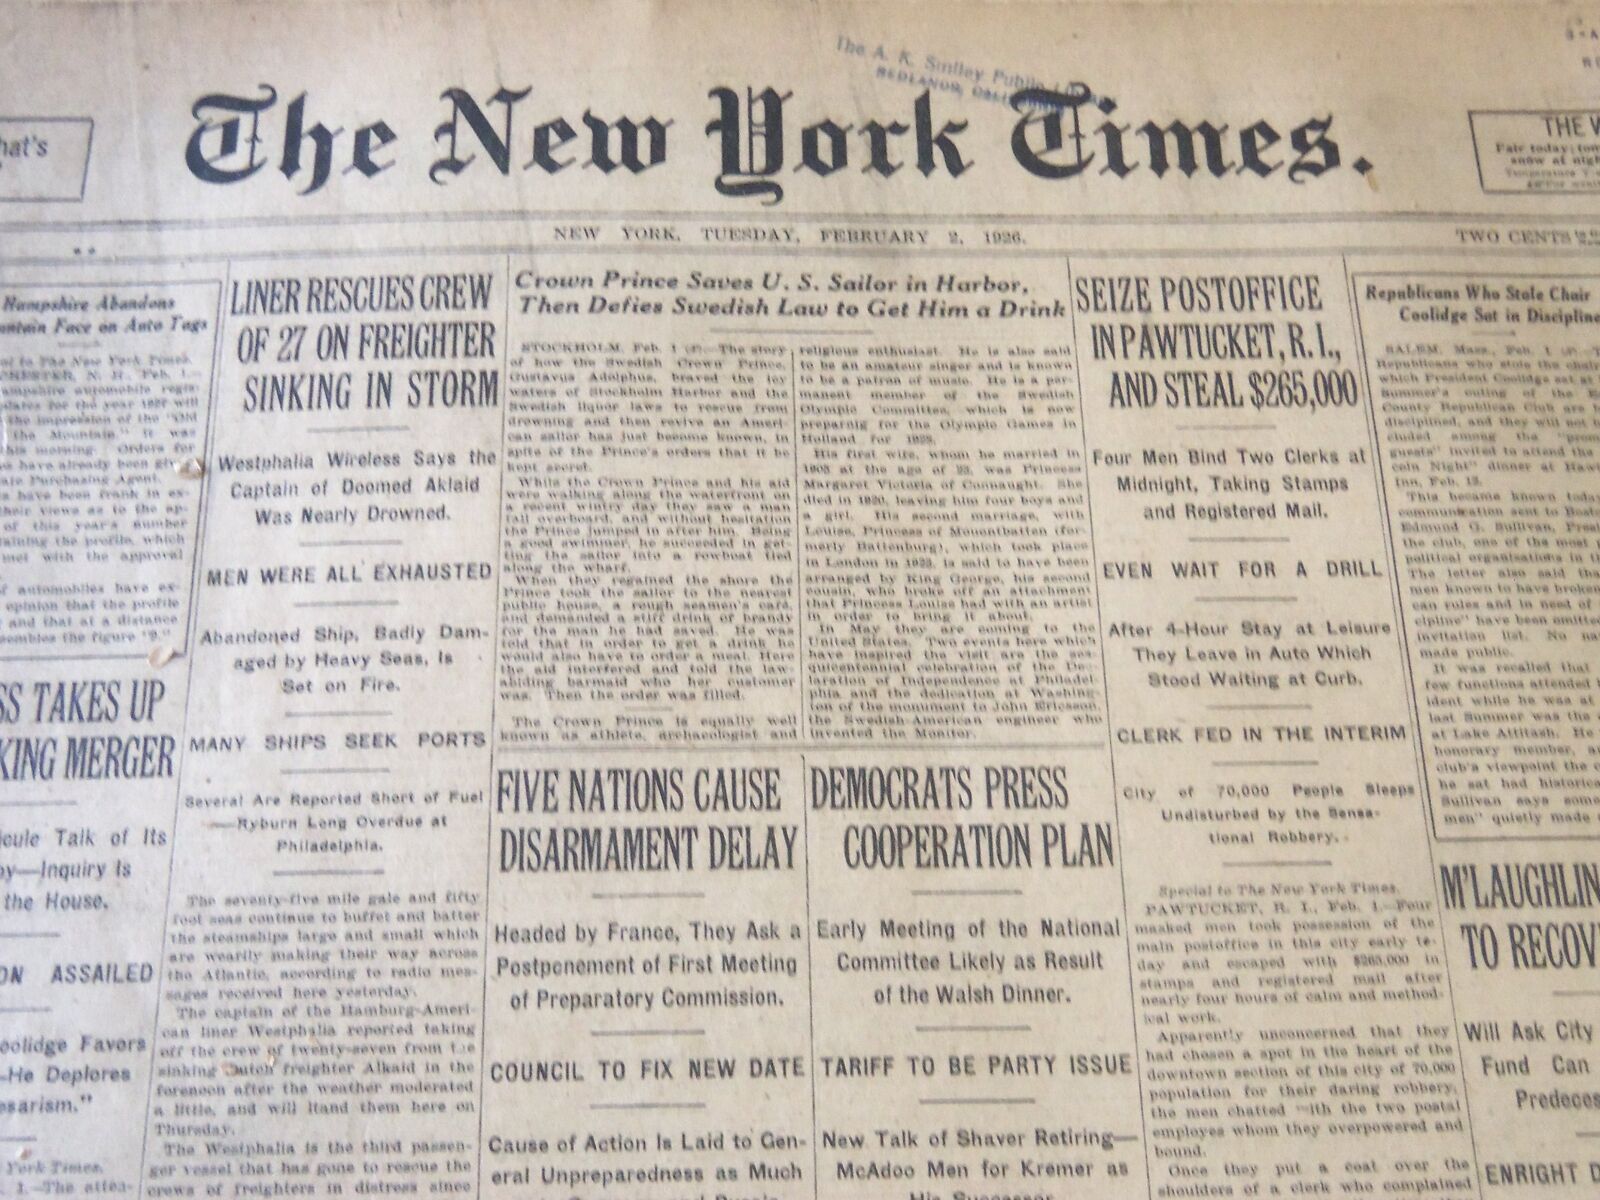 1926 FEB 2 NEW YORK TIMES SEIZE POST OFFICE IN PAWTUCKET & STEAL $265K - NT 6612